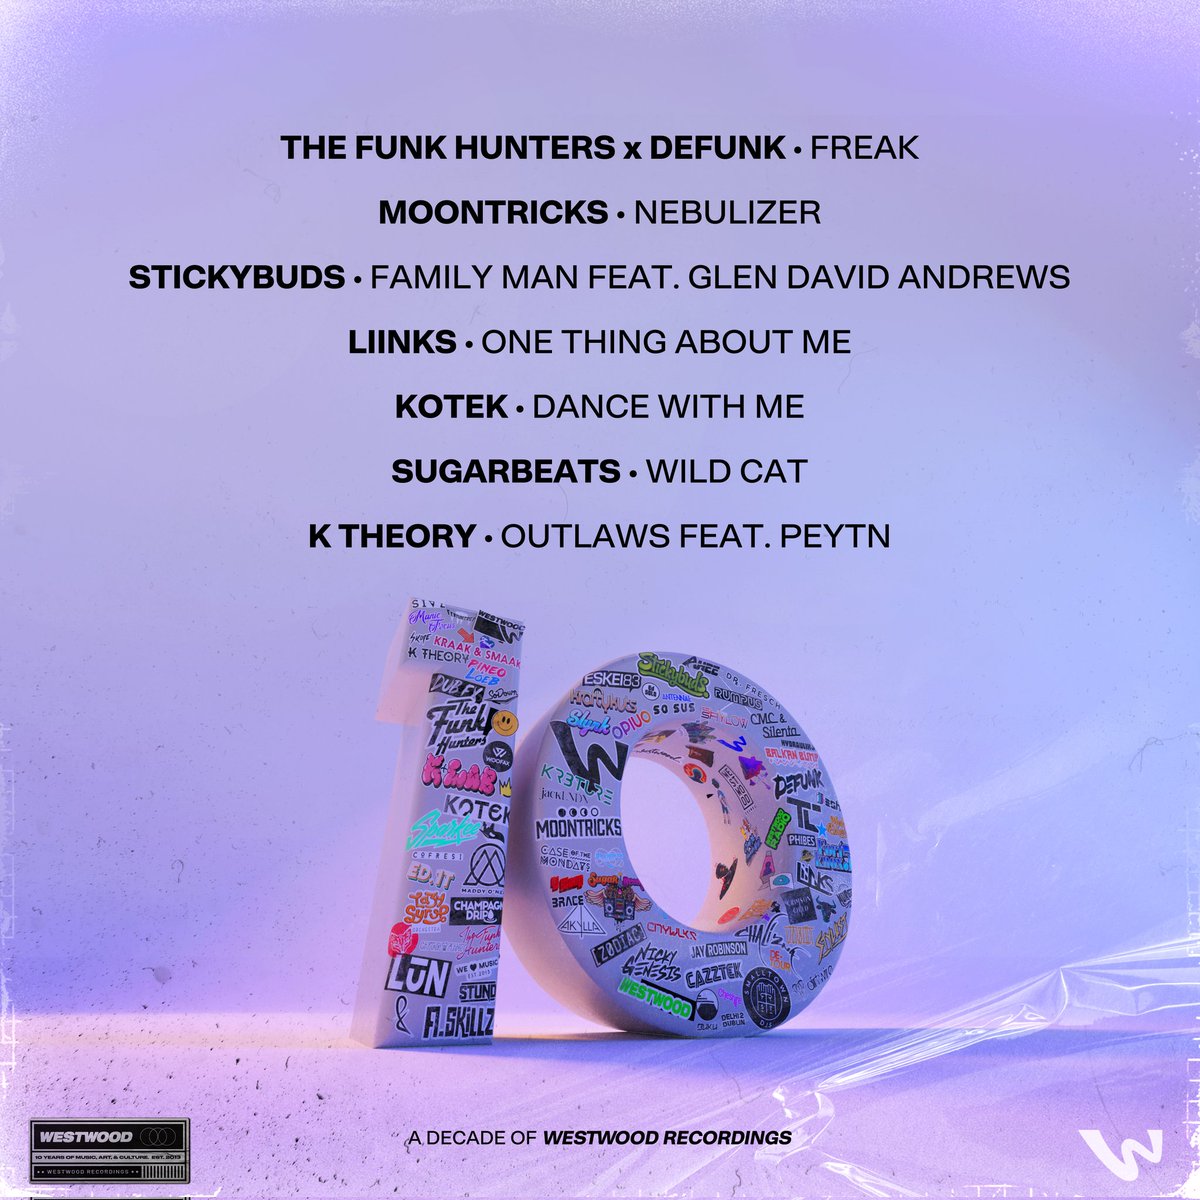 10 Years of Westwood Recordings (Album) Out Now! 🔟✨ Seven brand new songs by @thefunkhunters, @Defunk_Official, @moontricksmusic, Stickybuds, @Kotek_Music, @weareliinks, SugarBeats, and @ktheoryofficial!! 🎶 Listen/download: wstwd.io/10years